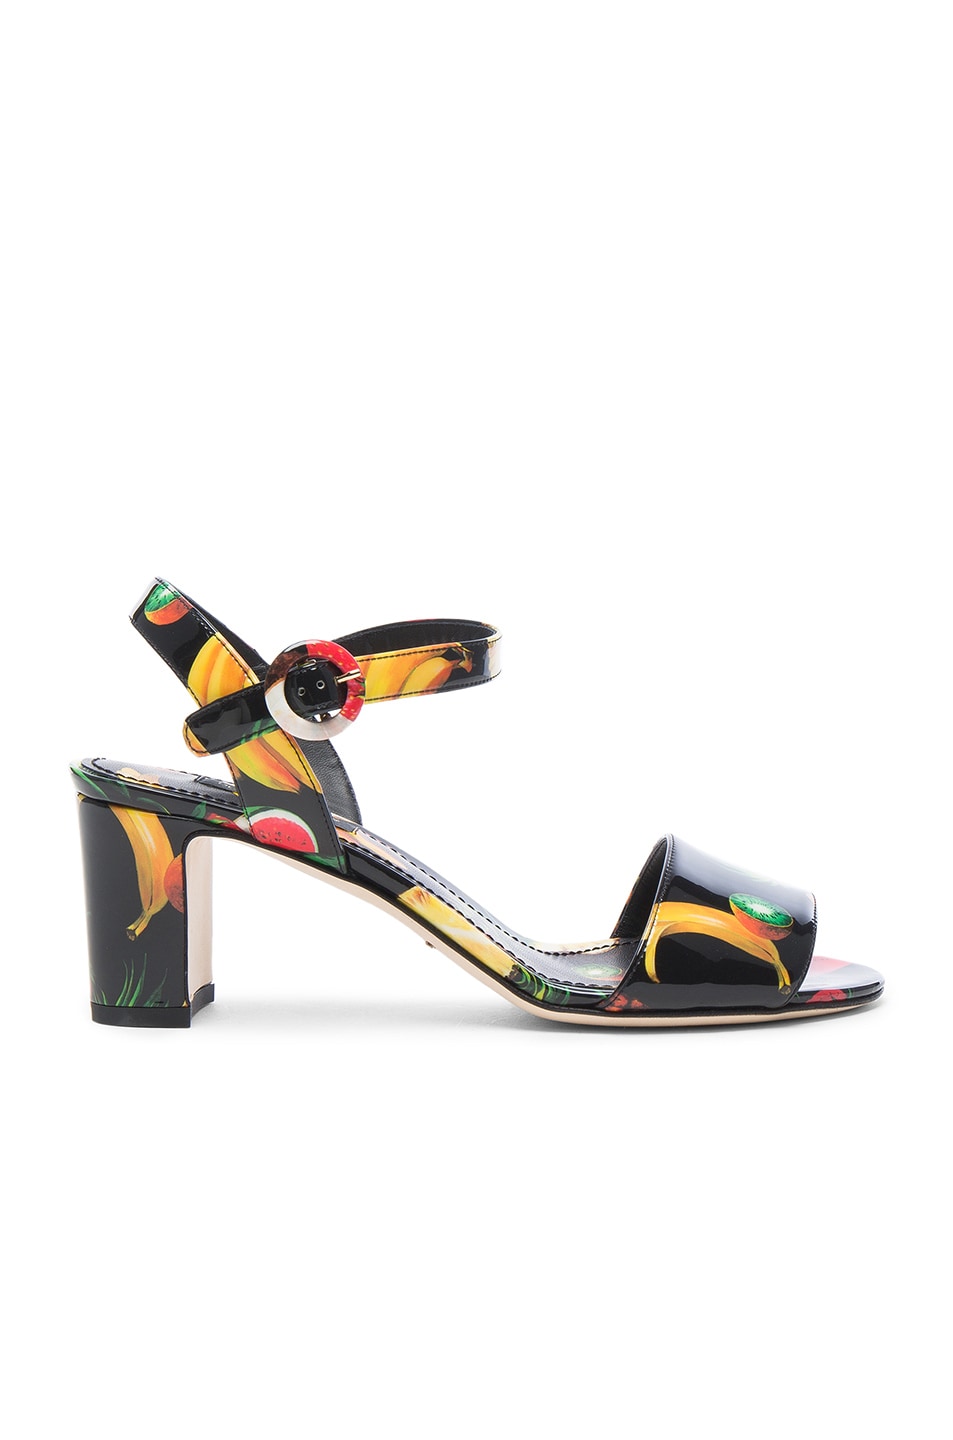 Image 1 of Dolce & Gabbana Heeled Sandals in Tropical Black